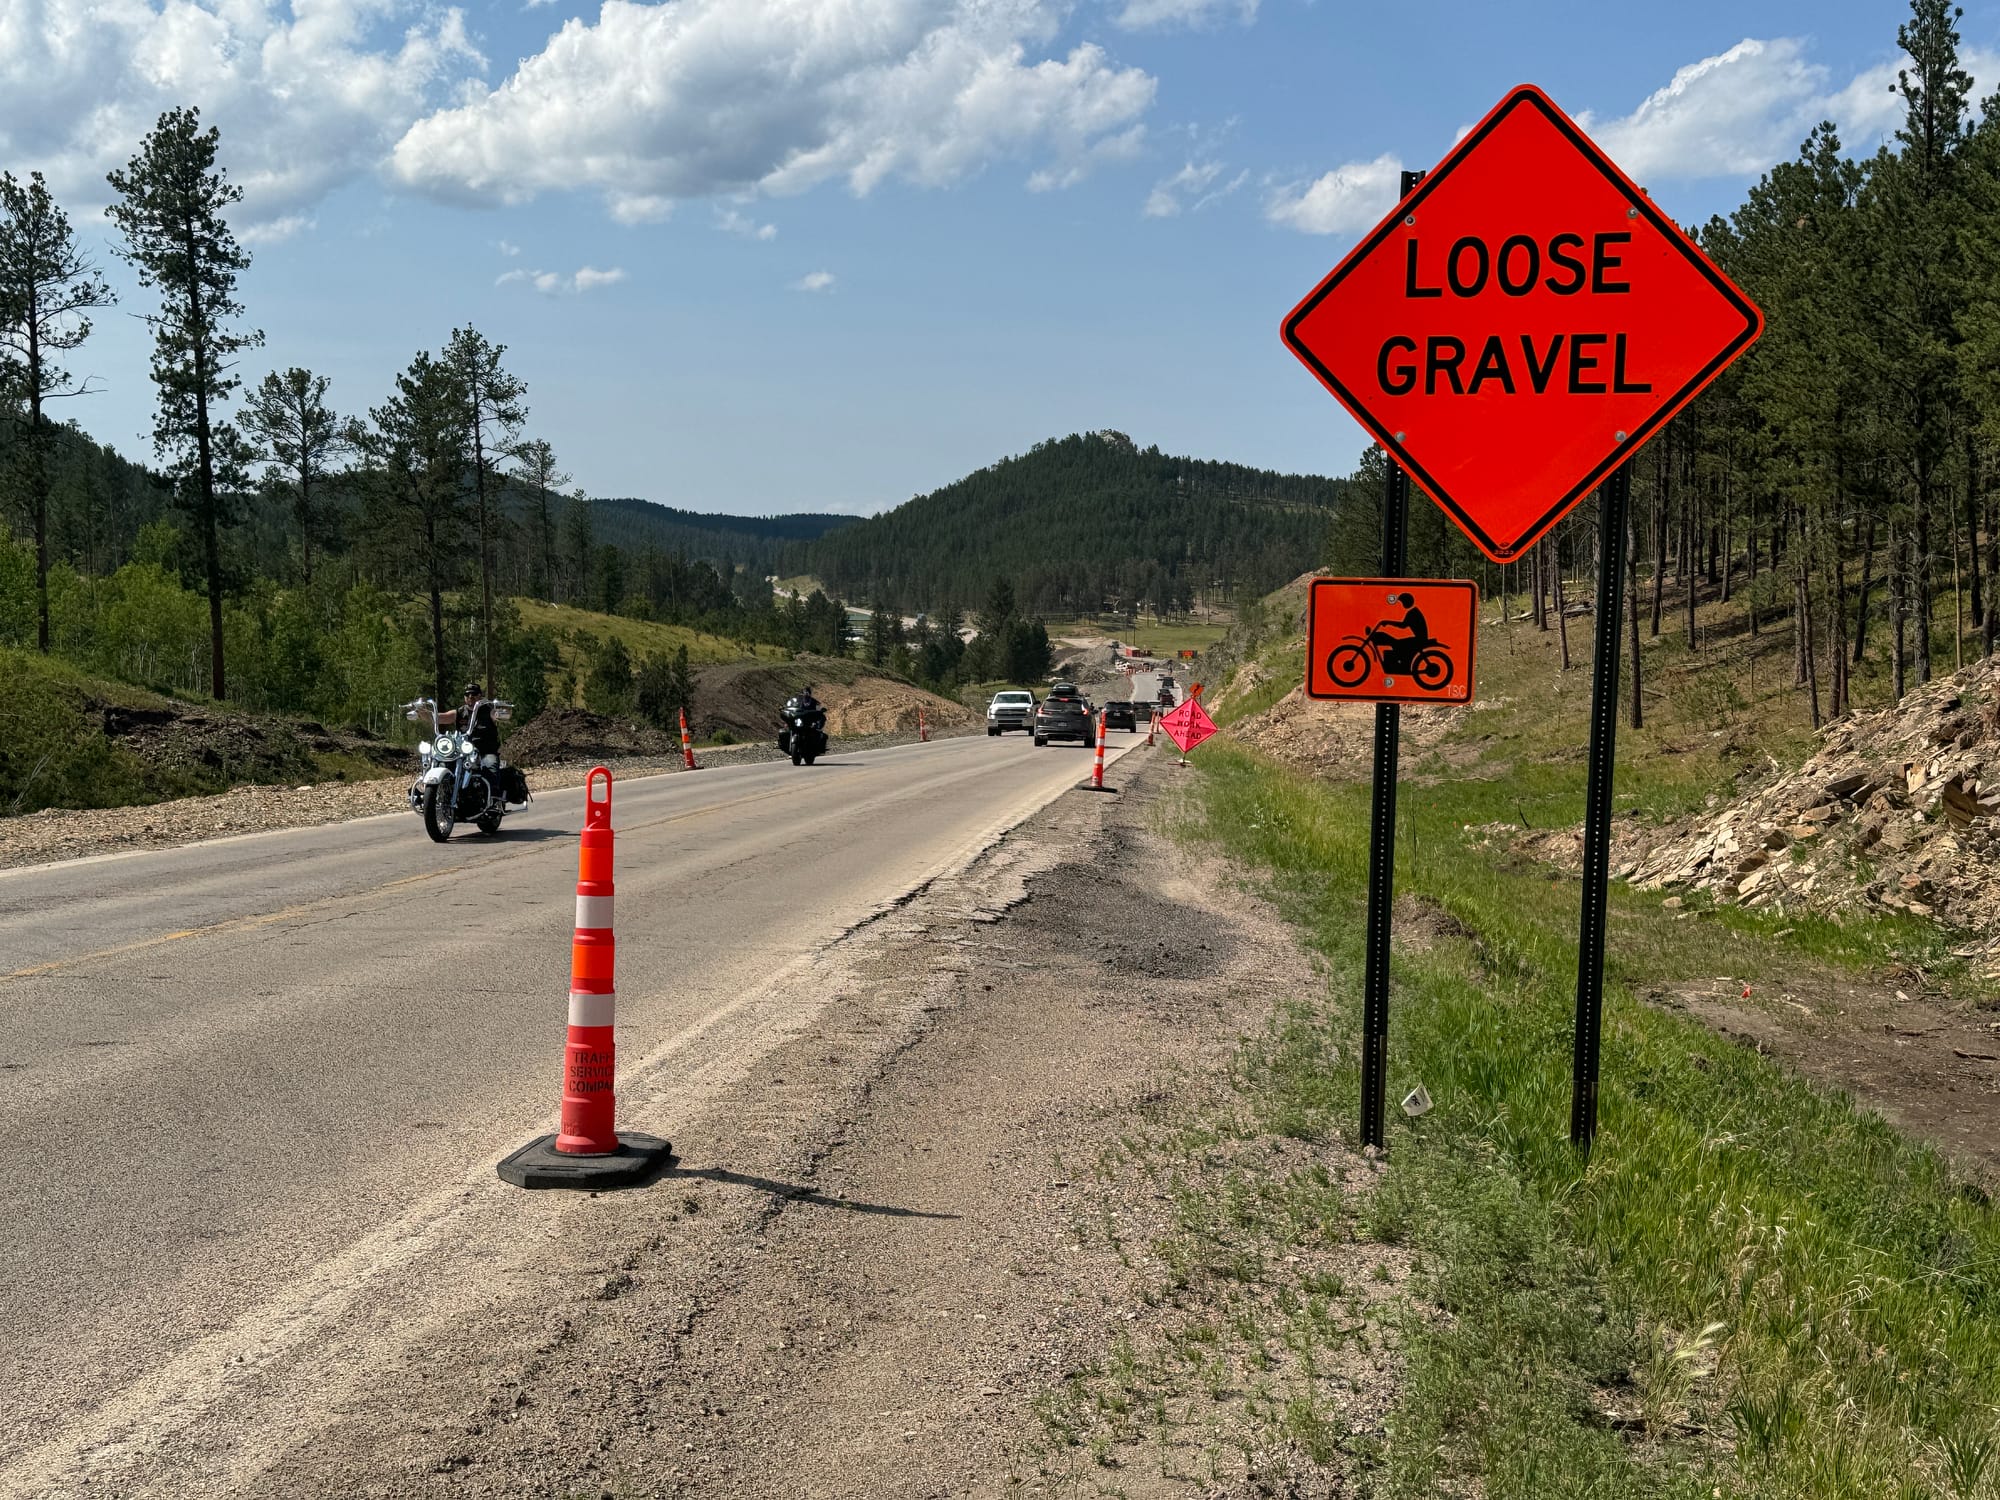 Gravel road with higher risk awaits Sturgis rally bikers